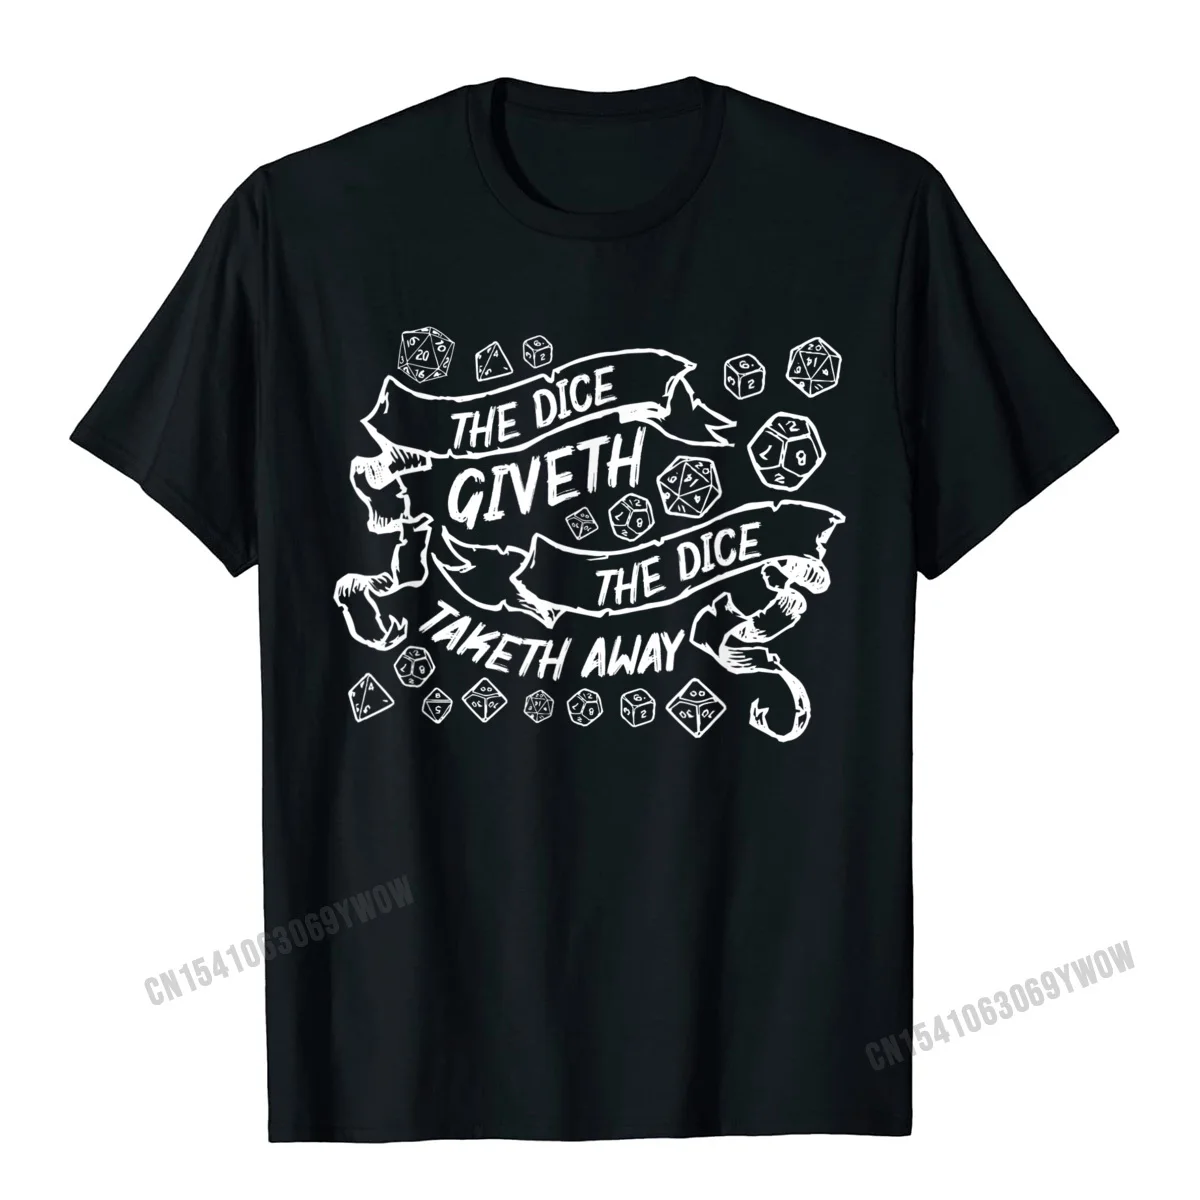 

The Dice Giveth And Taketh Away Funny Dice Critical Hit Miss T-Shirt Camisas Men Customized Tops Tees Male T Shirts Normal